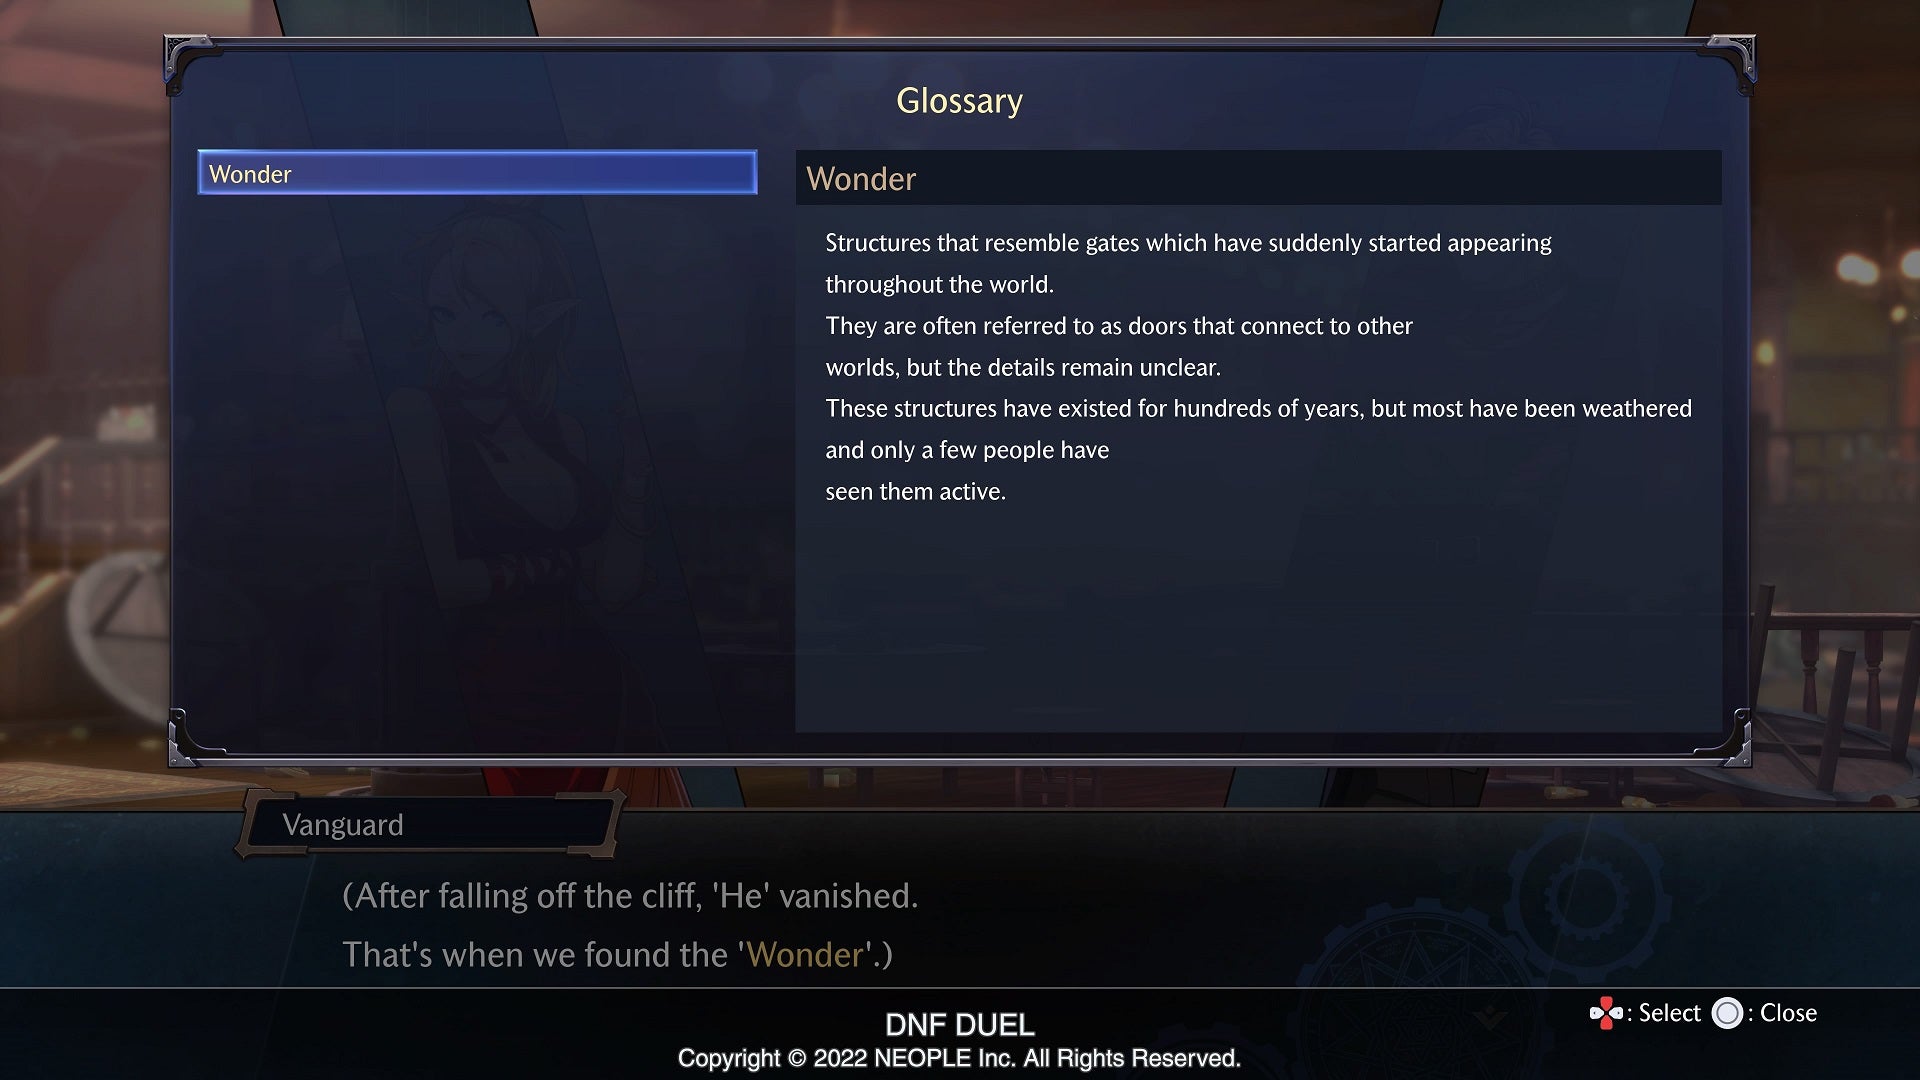 The in-game glossary in the DNF Duel story mode